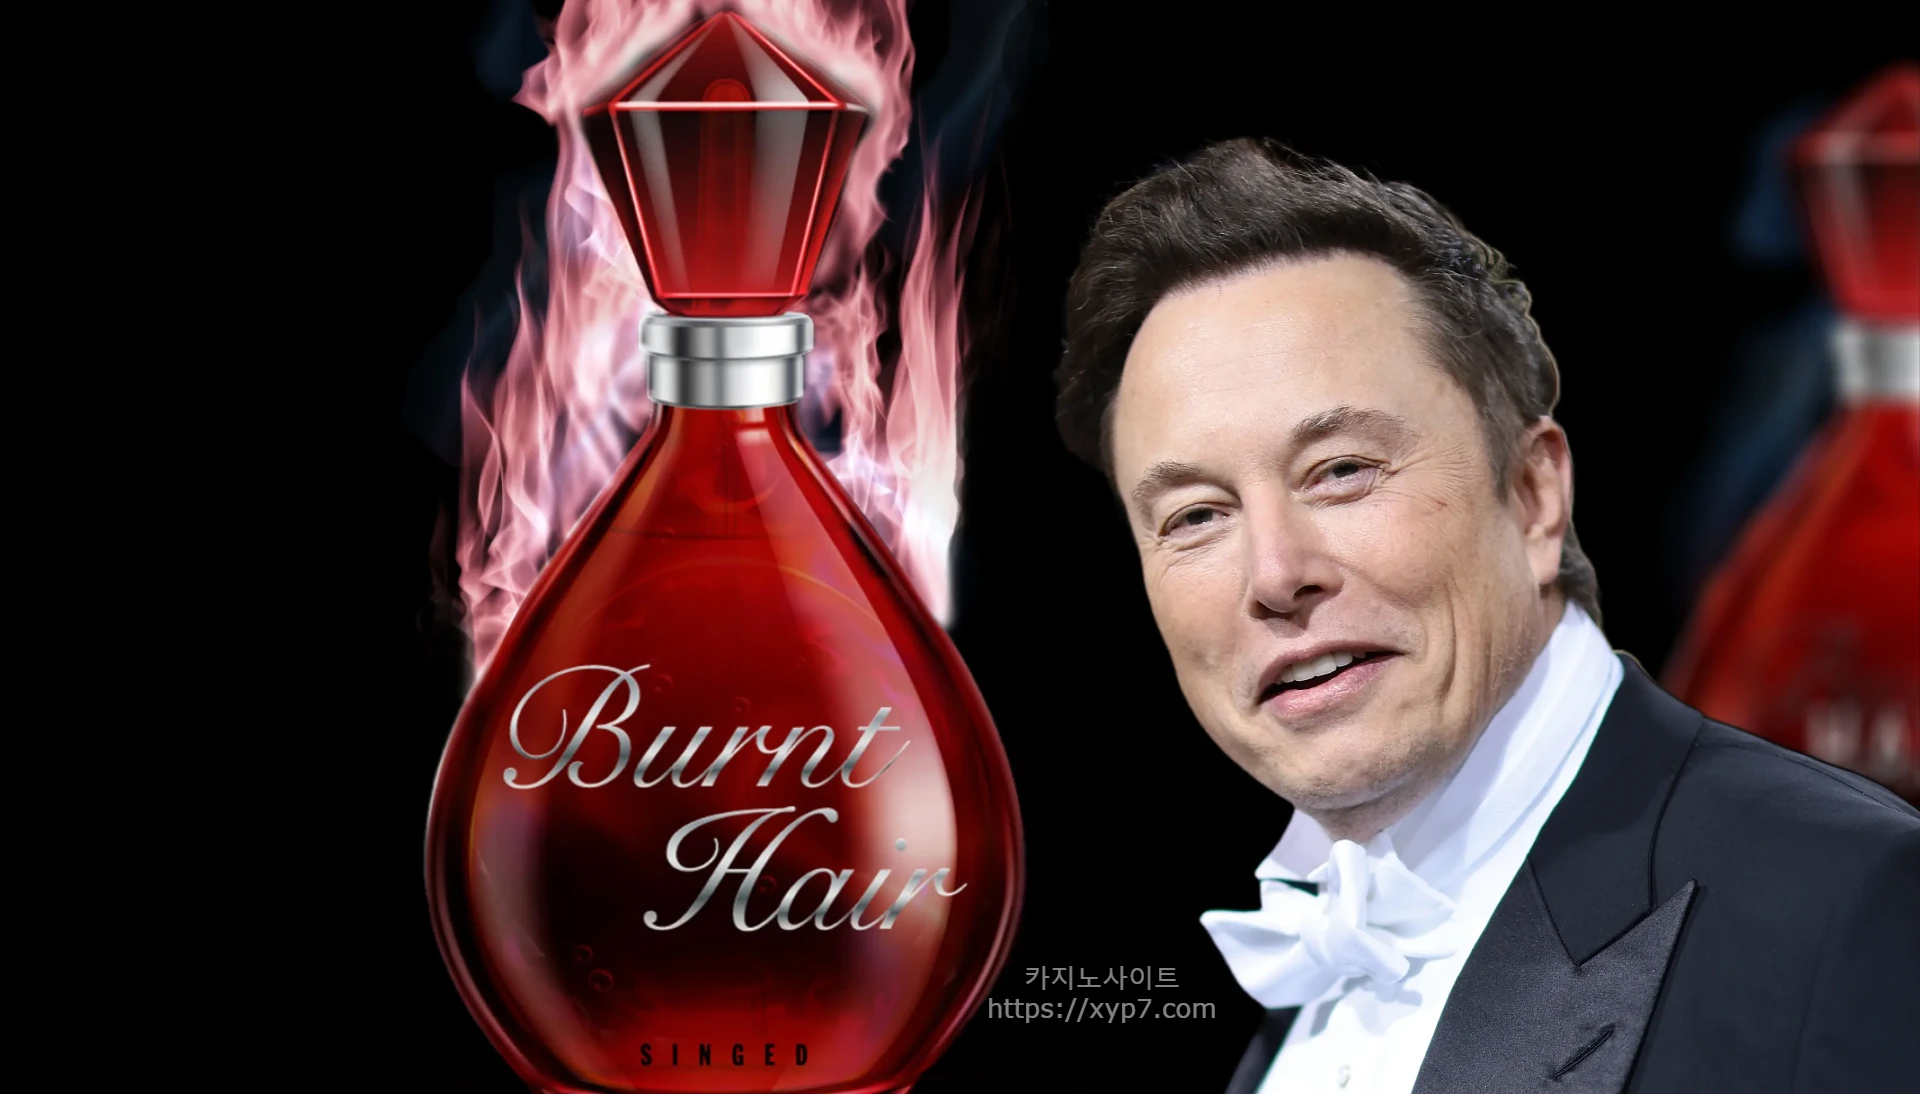 Read more about the article Elon Musk’s Launches New Perfume Business to Buy Twitter